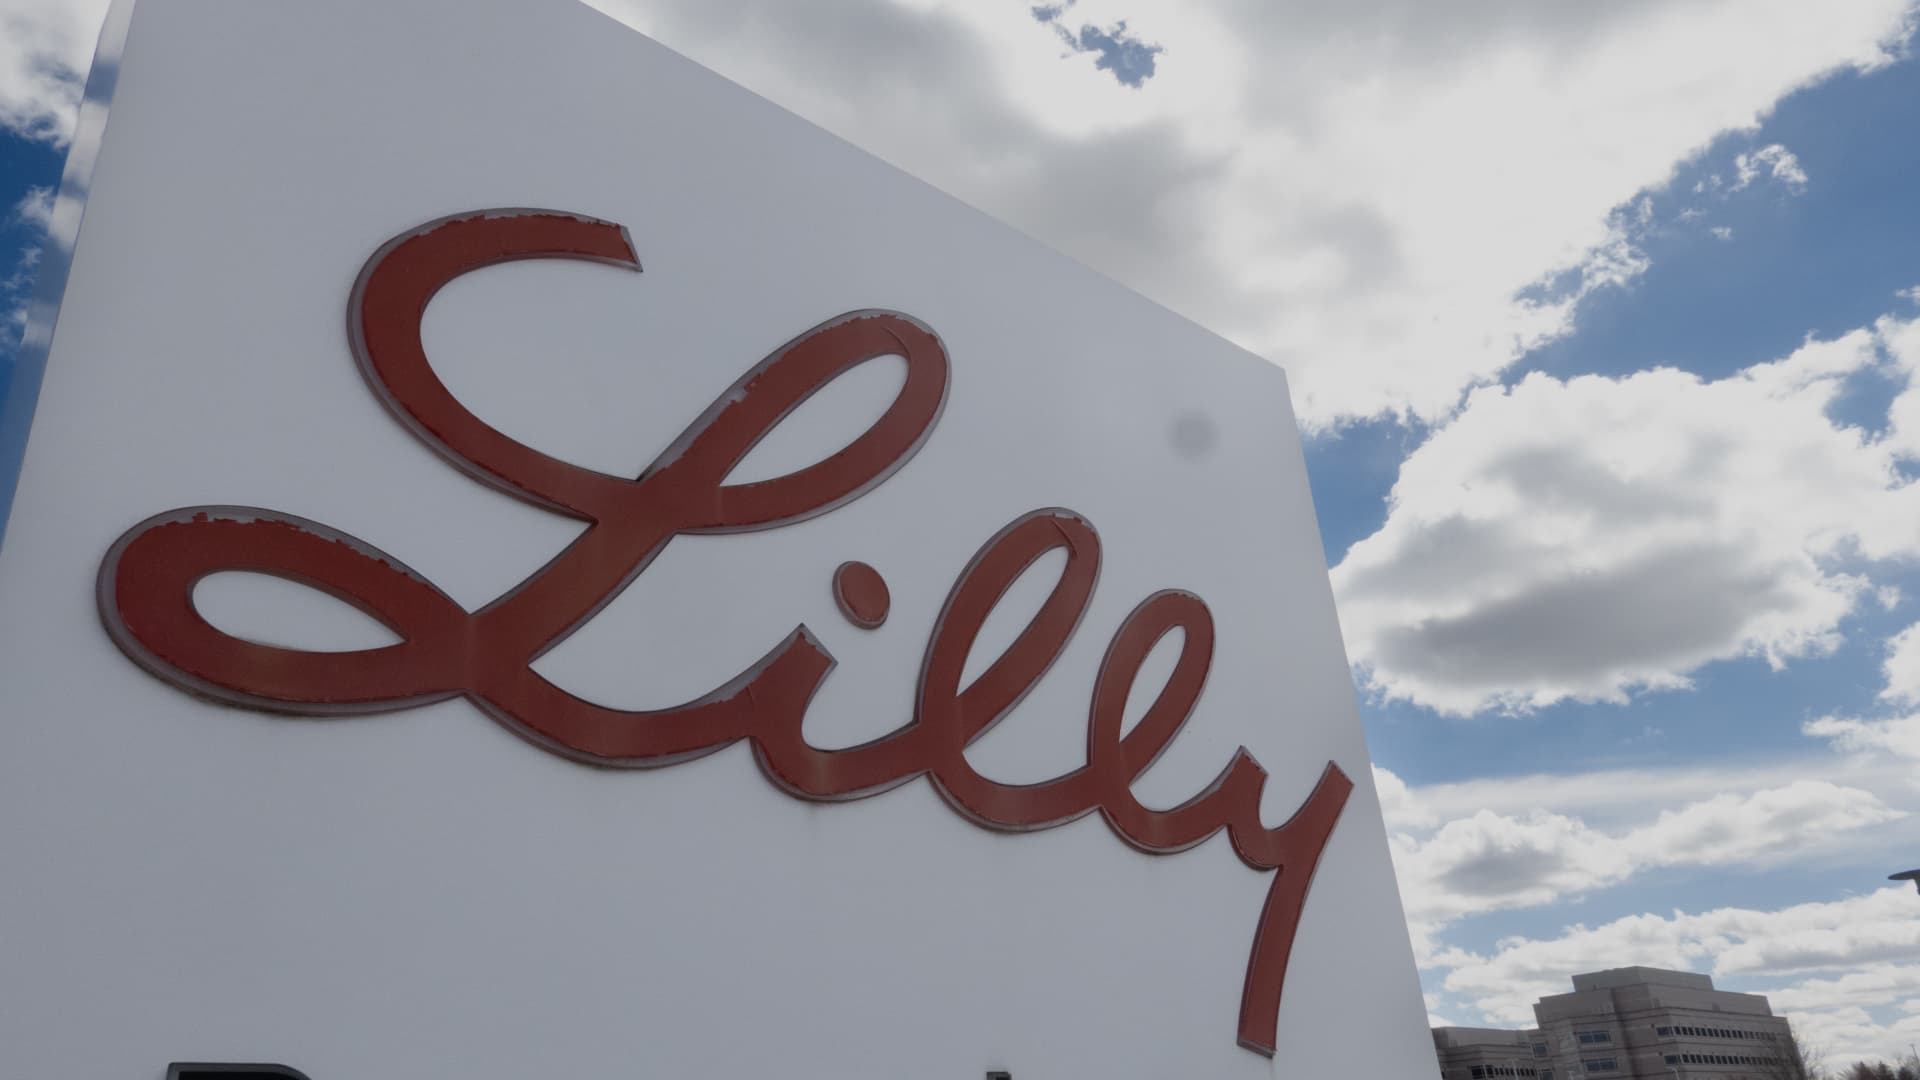 Stocks making the biggest premarket moves: Eli Lilly, Travelers, United Airlines, Alcoa and more - CNBC